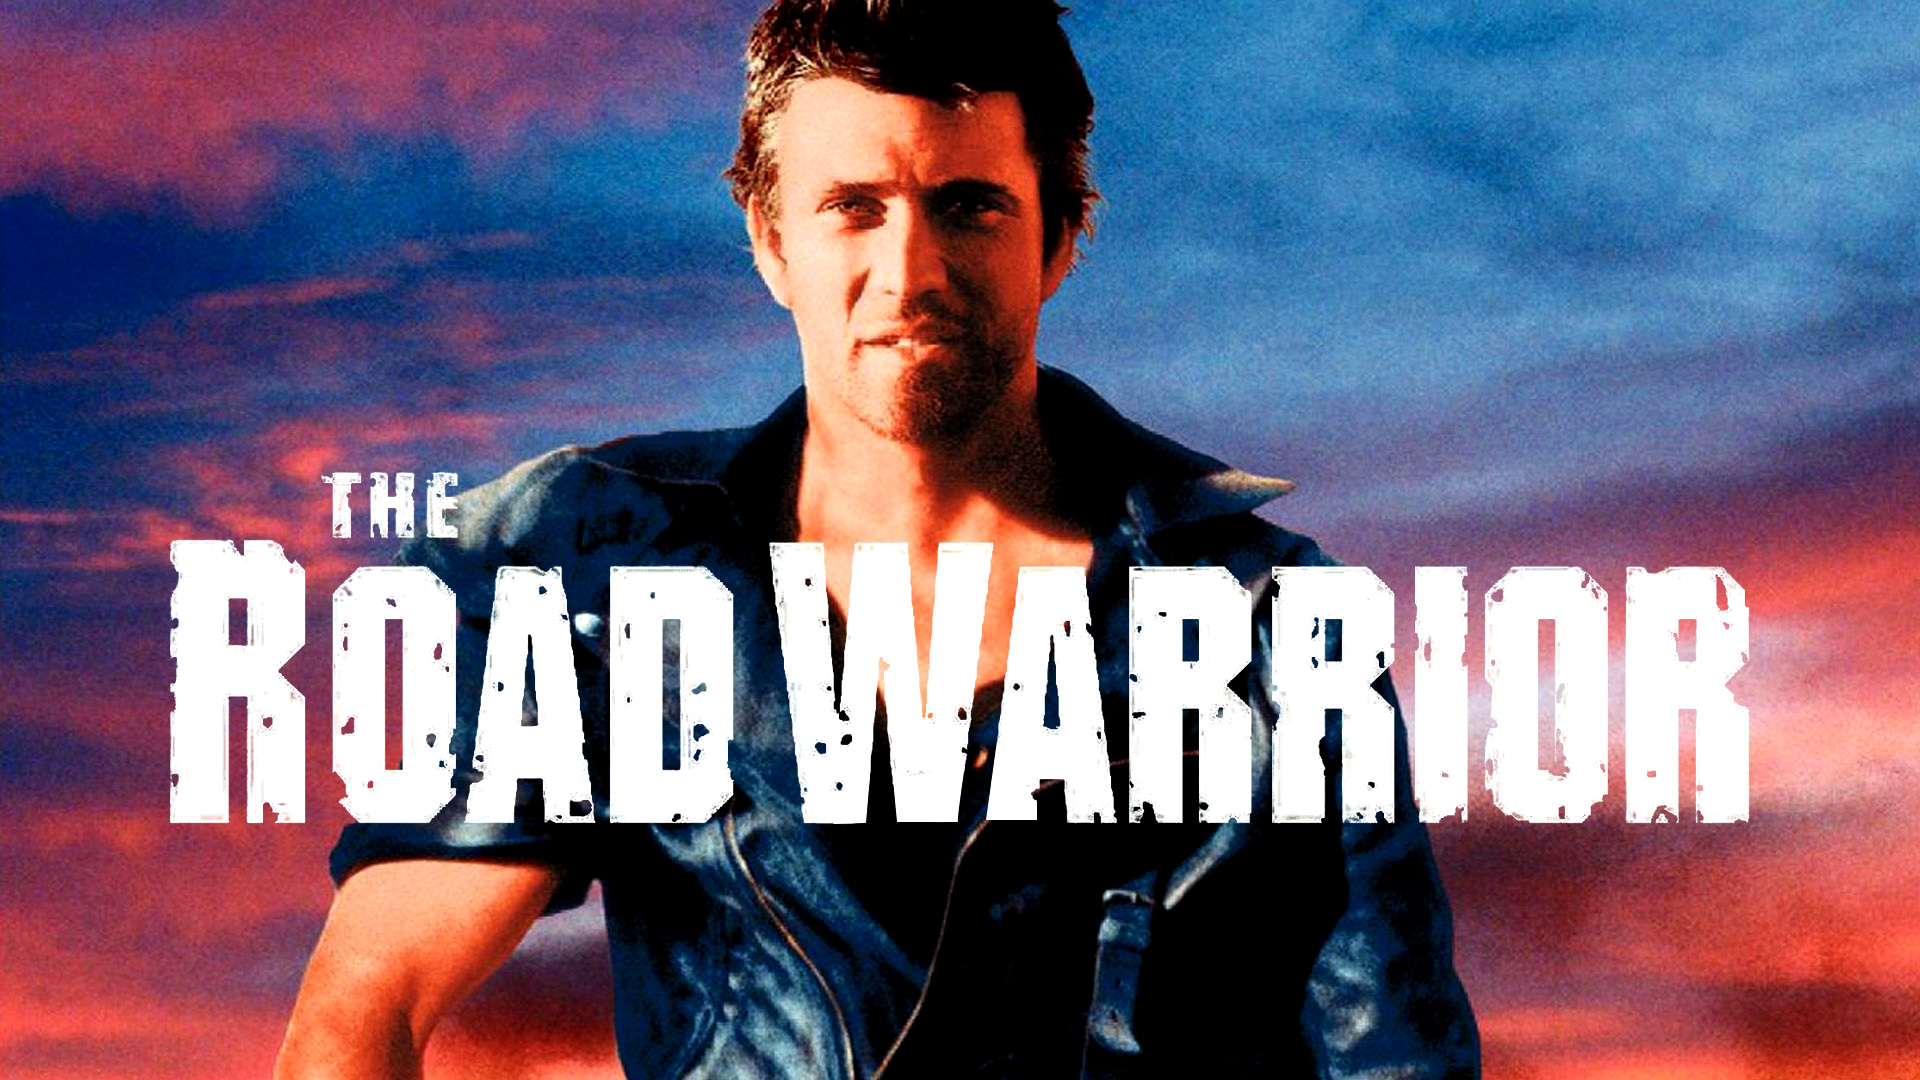 39 Facts about the movie The Road Warrior - Facts.net